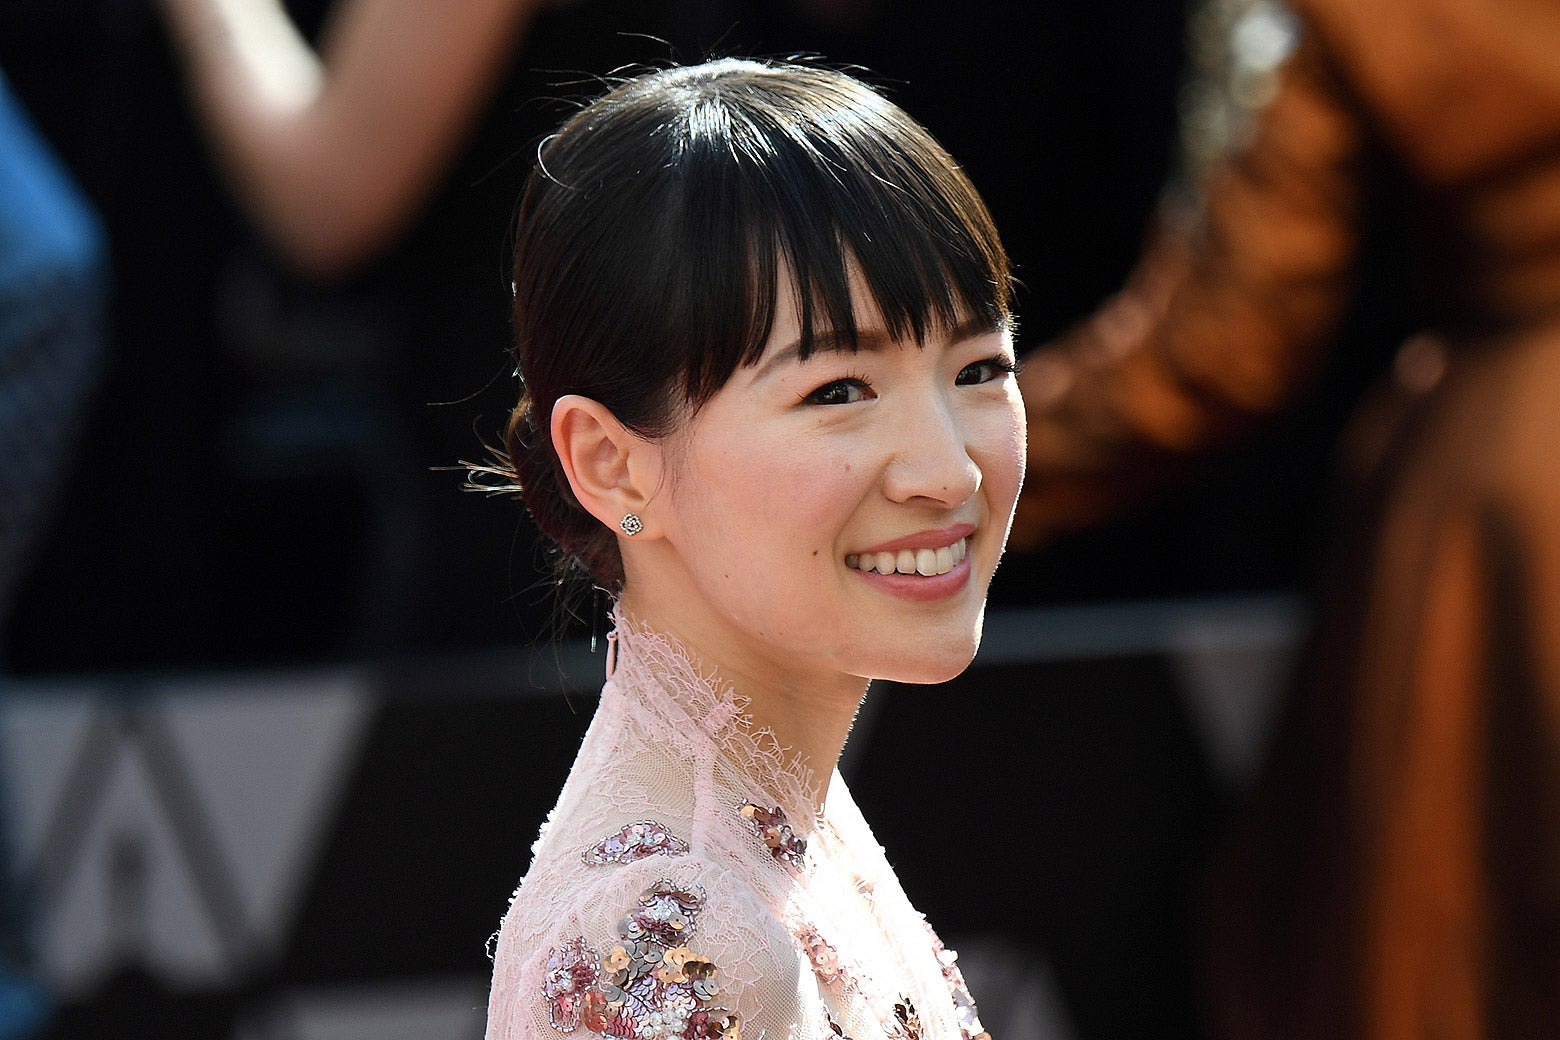 Marie Kondo “messy” quote: Why the parenting world lost its mind over a Kondo headline. - Slate